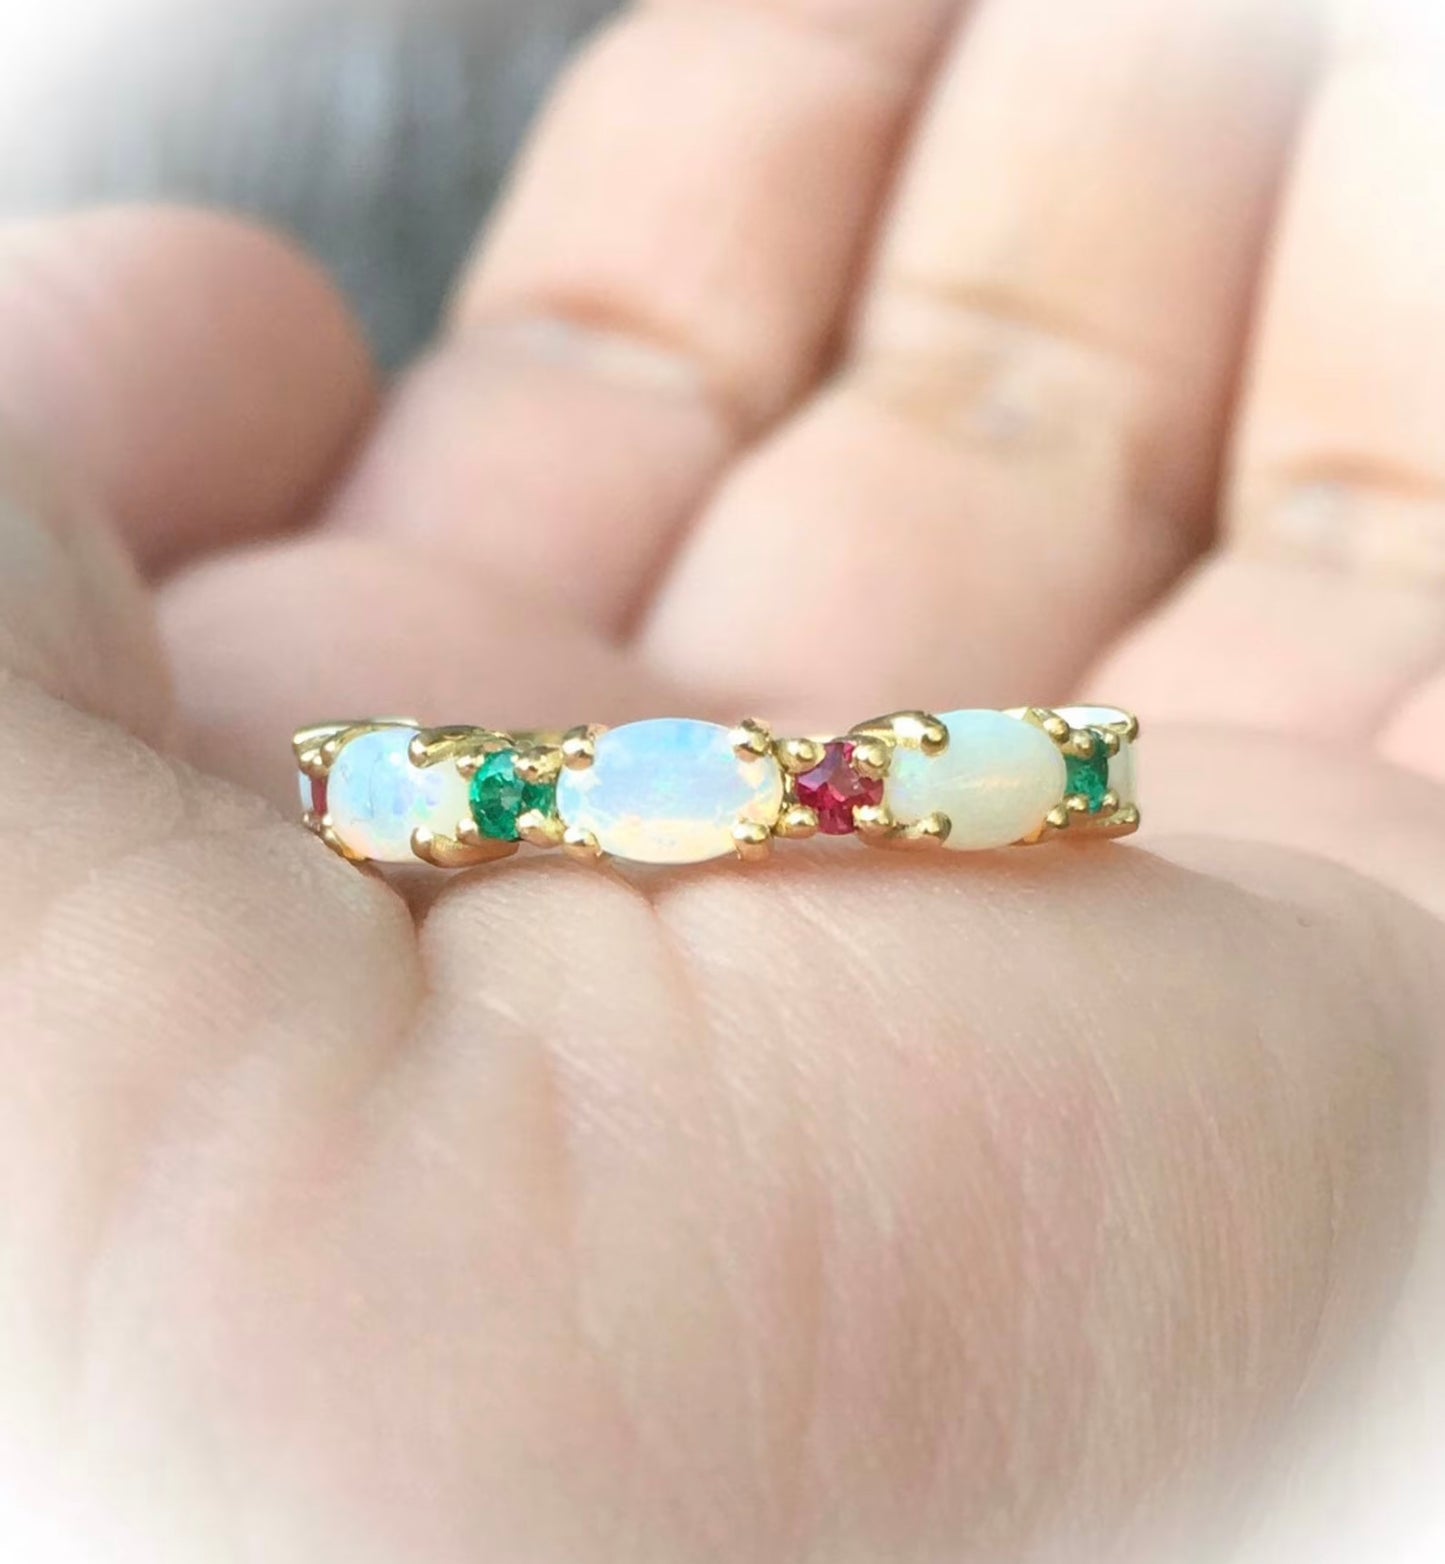 Oval Opal Ring with Emeralds and Rubies/ Alternating Opal Birthstone Stacking Ring/ Unique Opal Wedding Anniversary Ring/ Mothers Ring/ Holiday Fine Jewelry Gift